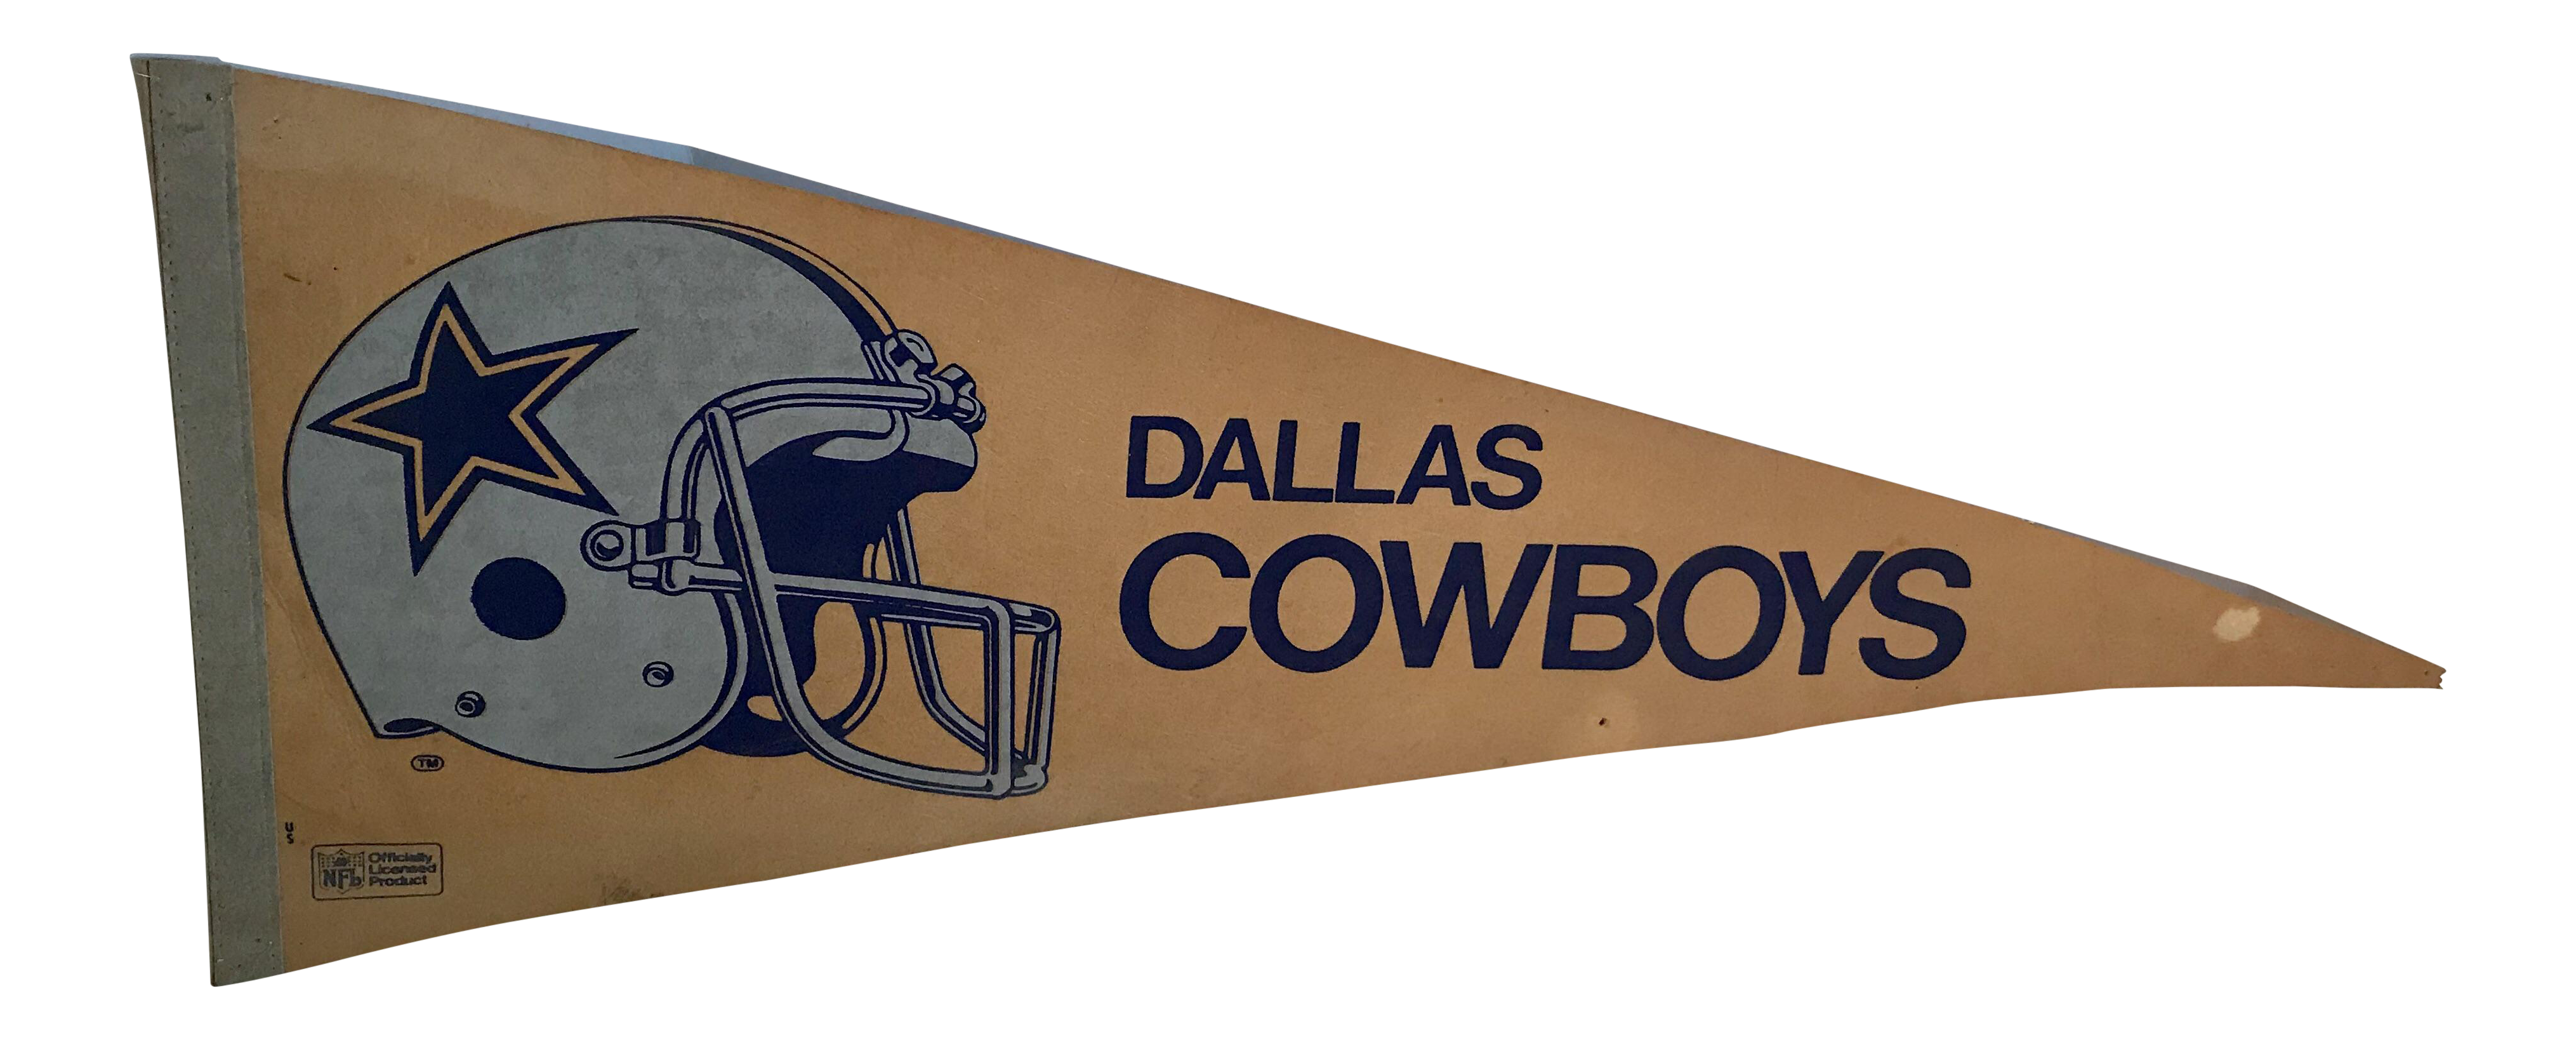 Cowboys Dallas PNG Image High Quality PNG Image